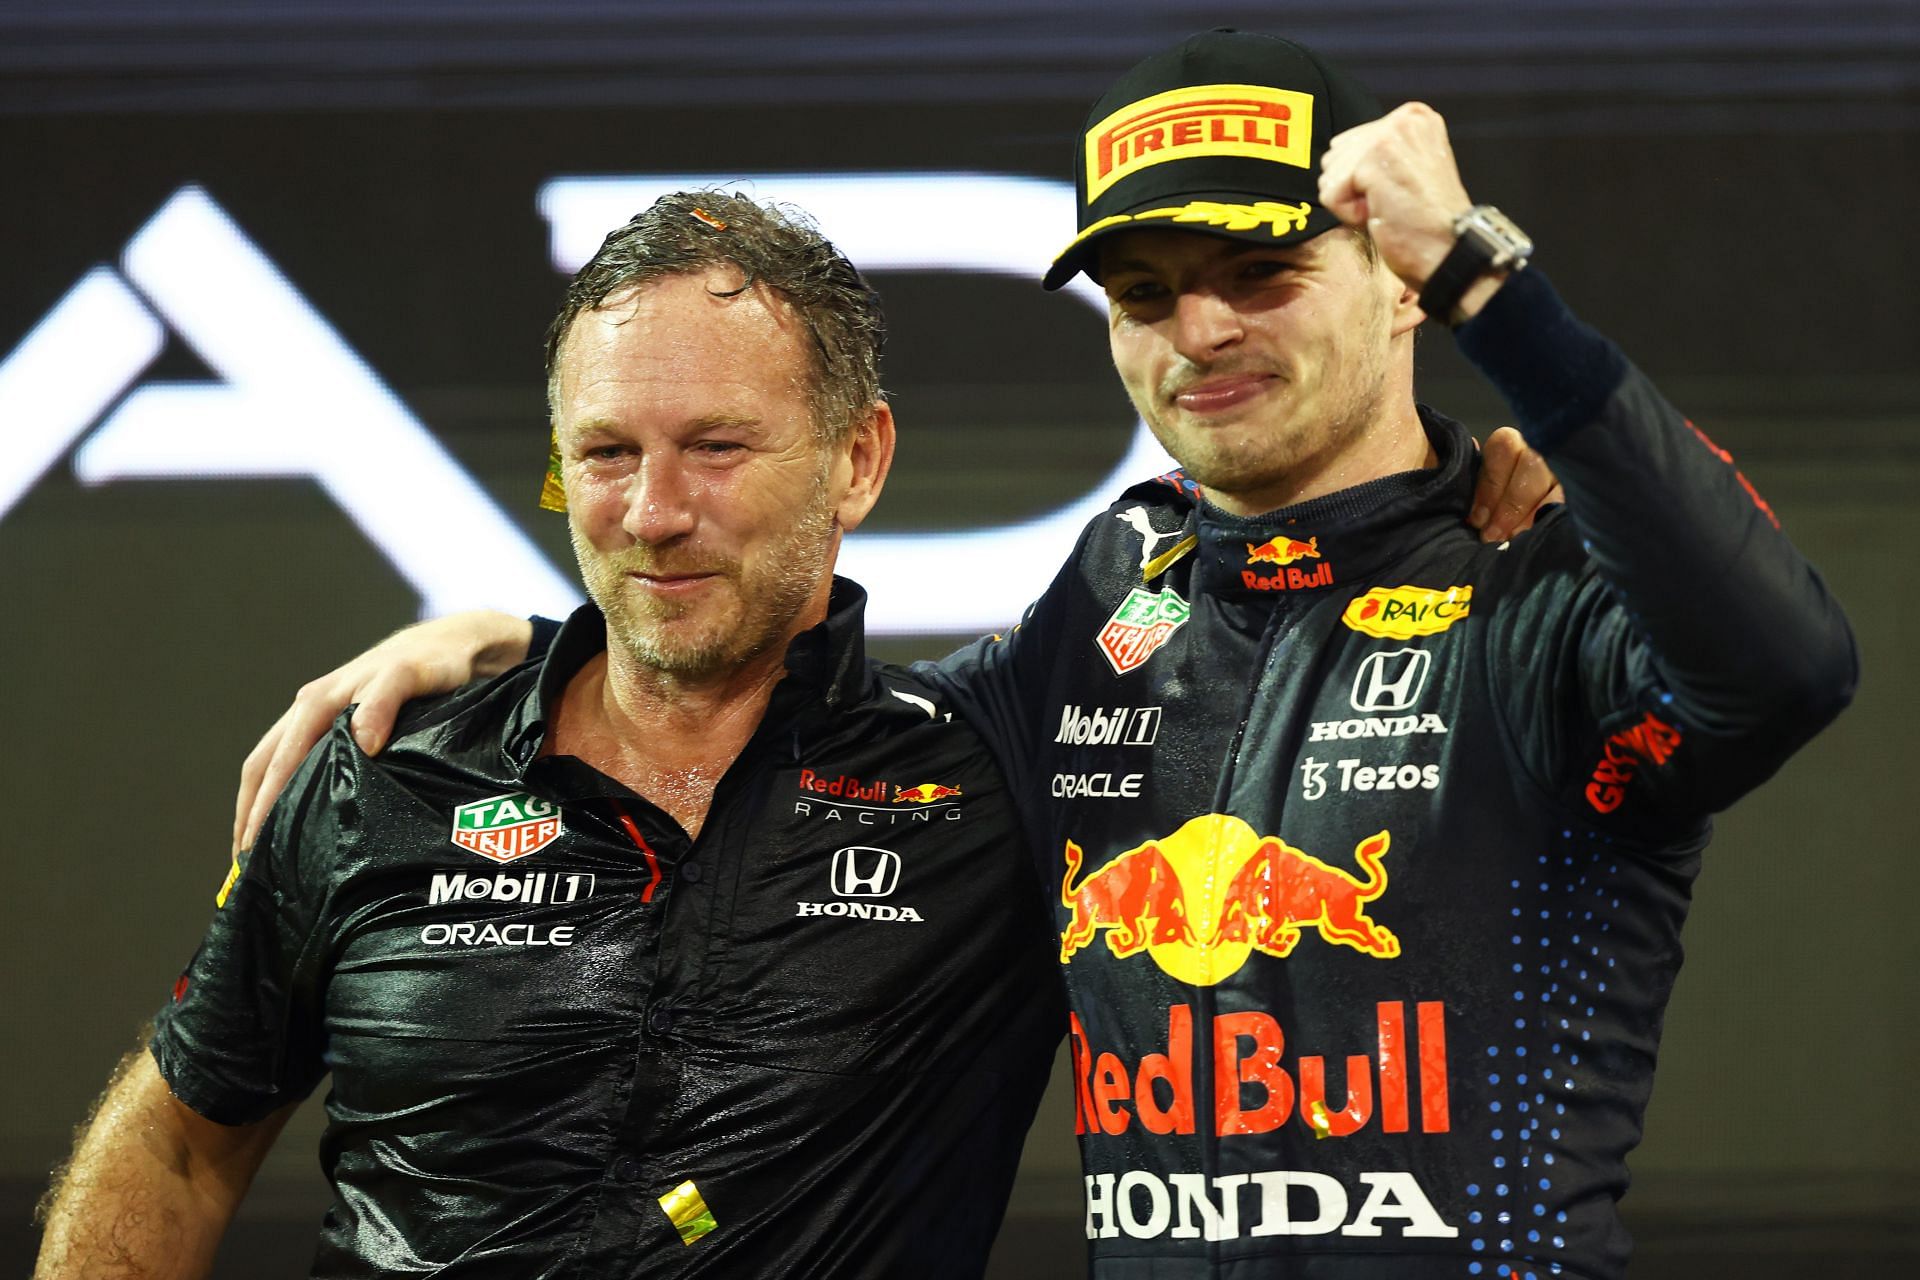 Max Verstappen capped the 2021 F1 season at the top of the driver standings